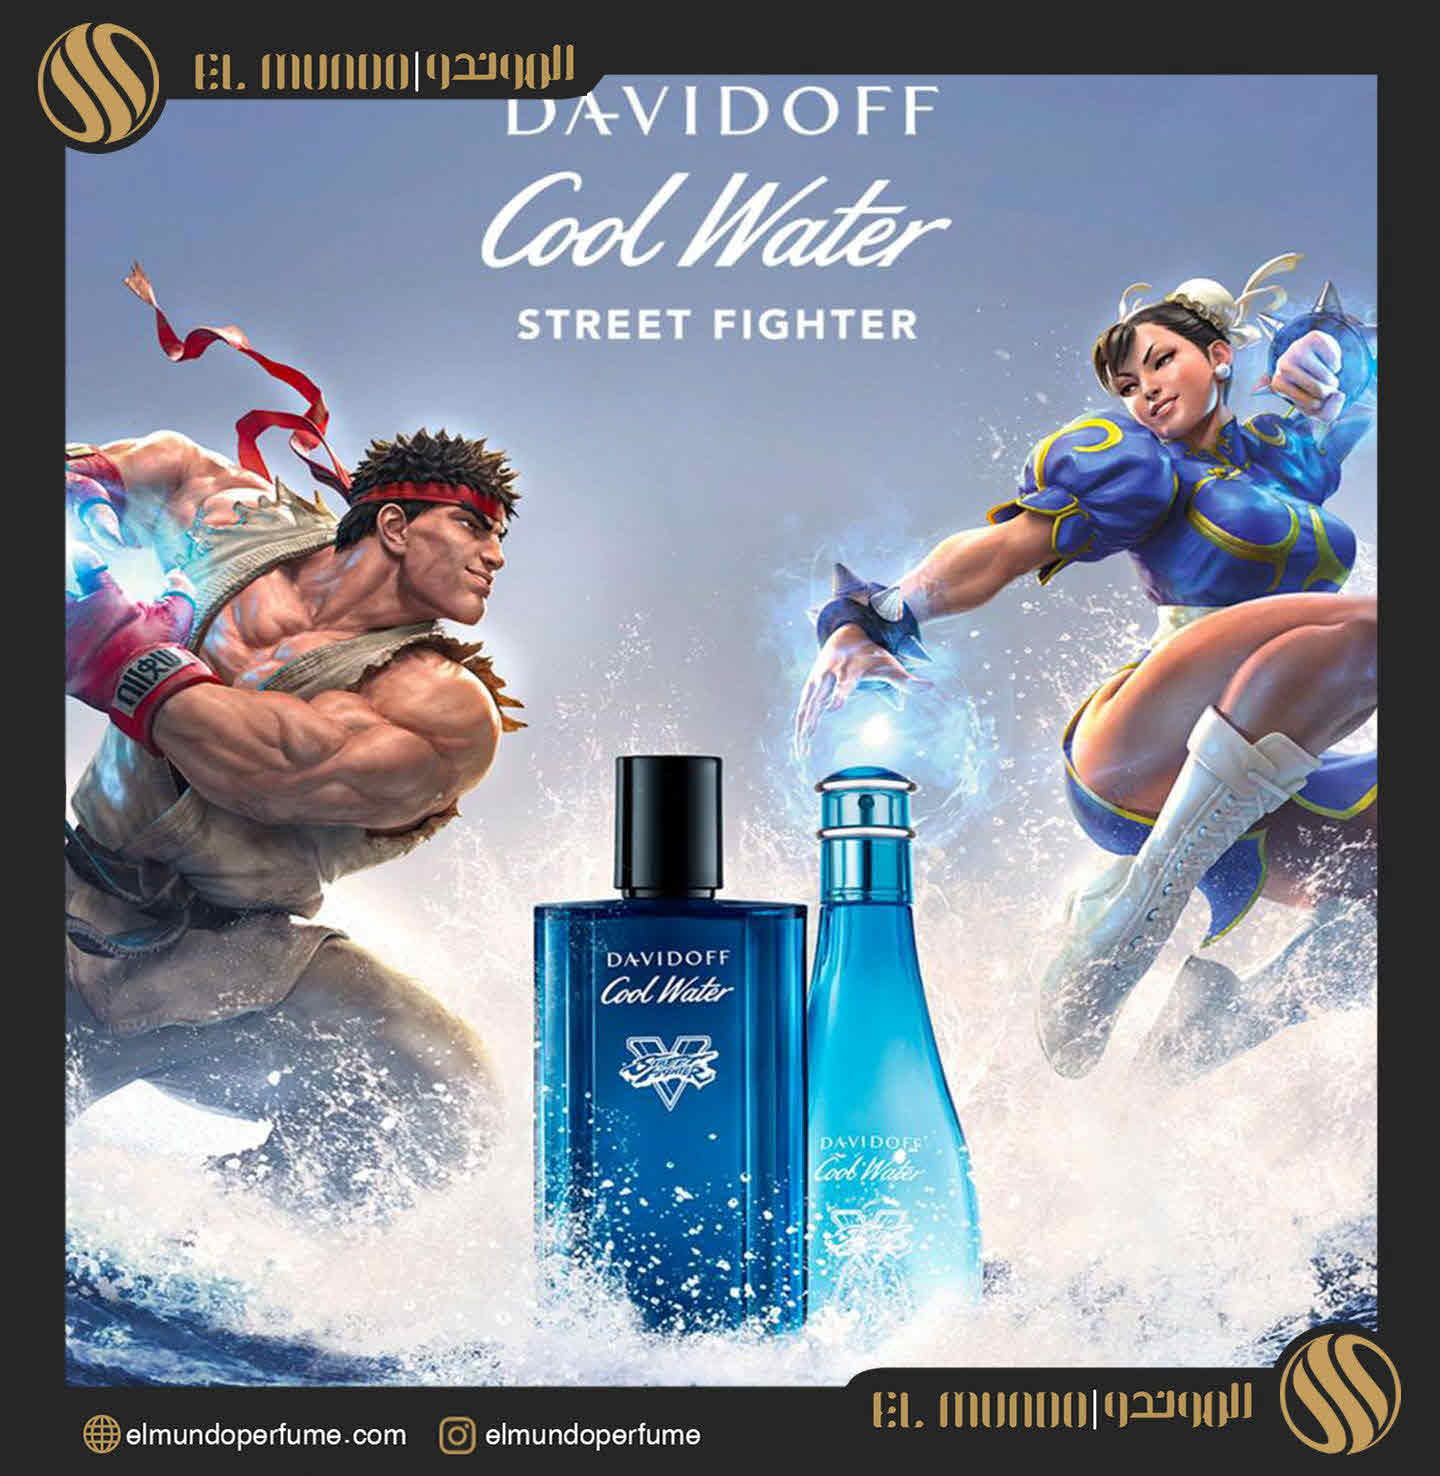 Cool Water Street Fighter Champion Summer Edition For Him Davidoff for men 3 - عطر زنانه دیویدوف کول واتر استریت فایتر چمپیون سامر ادیشن فور هر